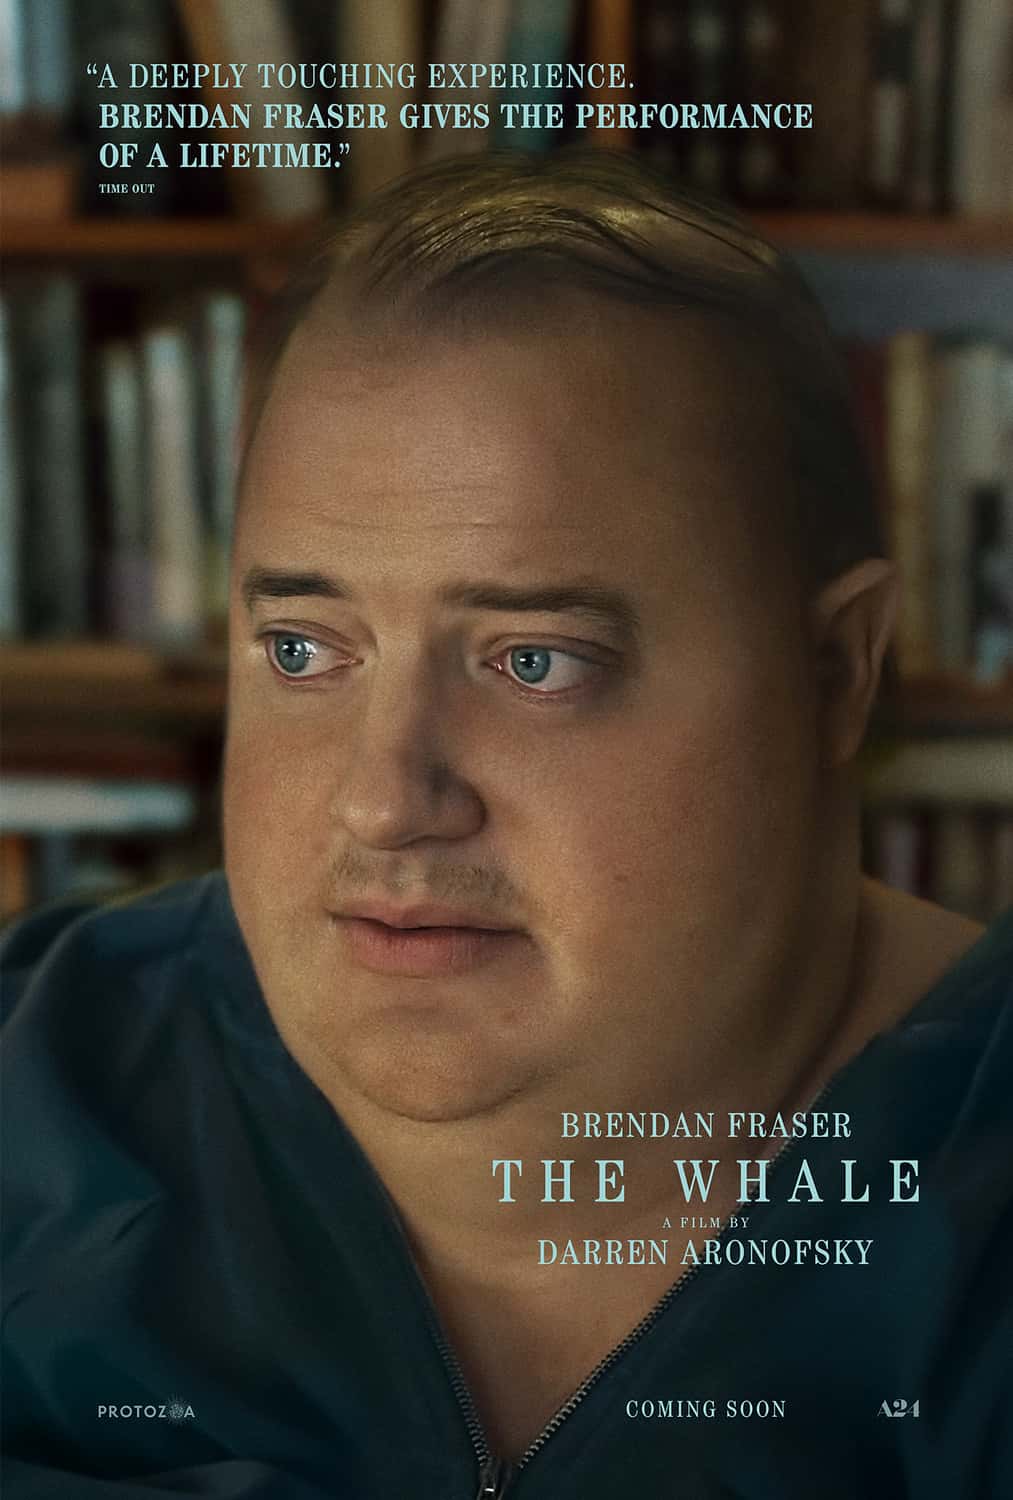 A new trailer and poster released for The Whale starring Brendan Fraser - movie UK release date 3rd February 2023 #thewhale